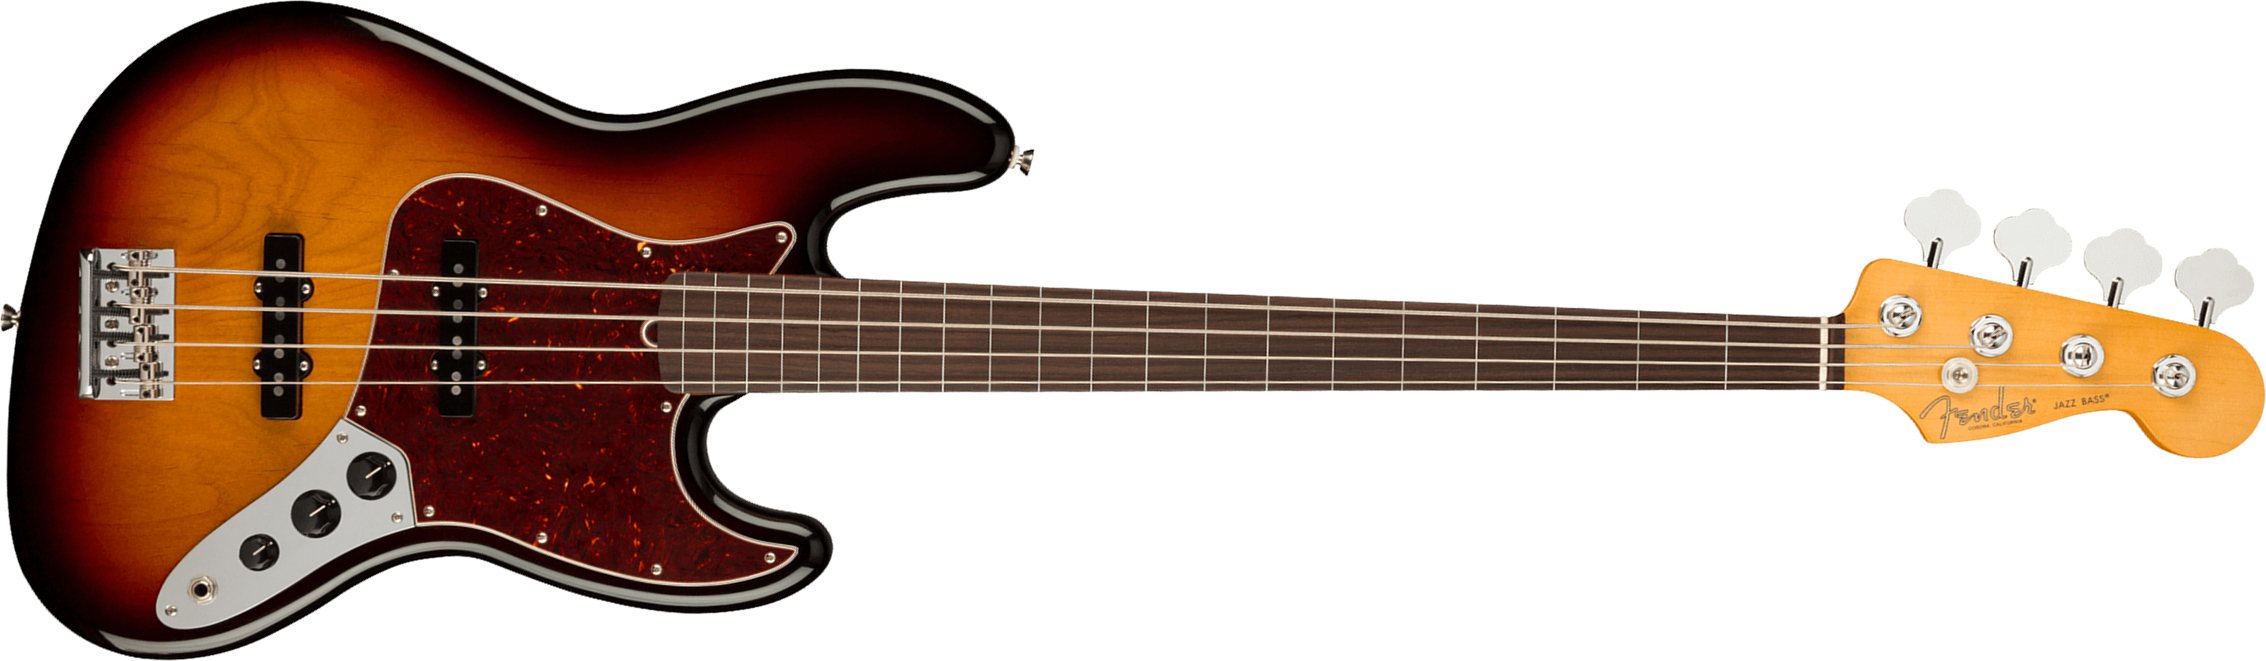 Fender Jazz Bass Fretless American Professional Ii Usa Rw - 3-color Sunburst - Solid body electric bass - Main picture